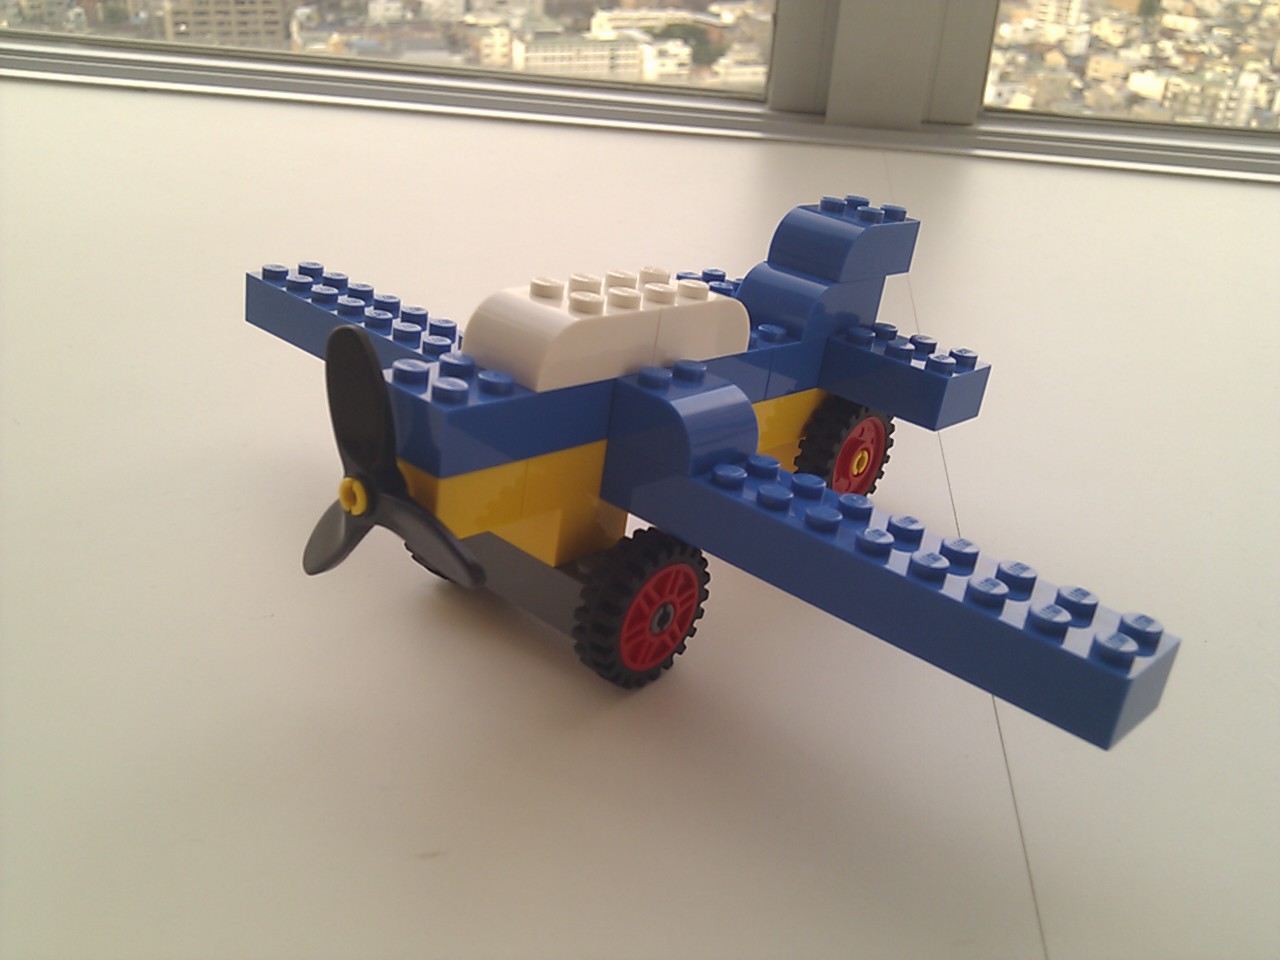 there is a toy plane made from legos